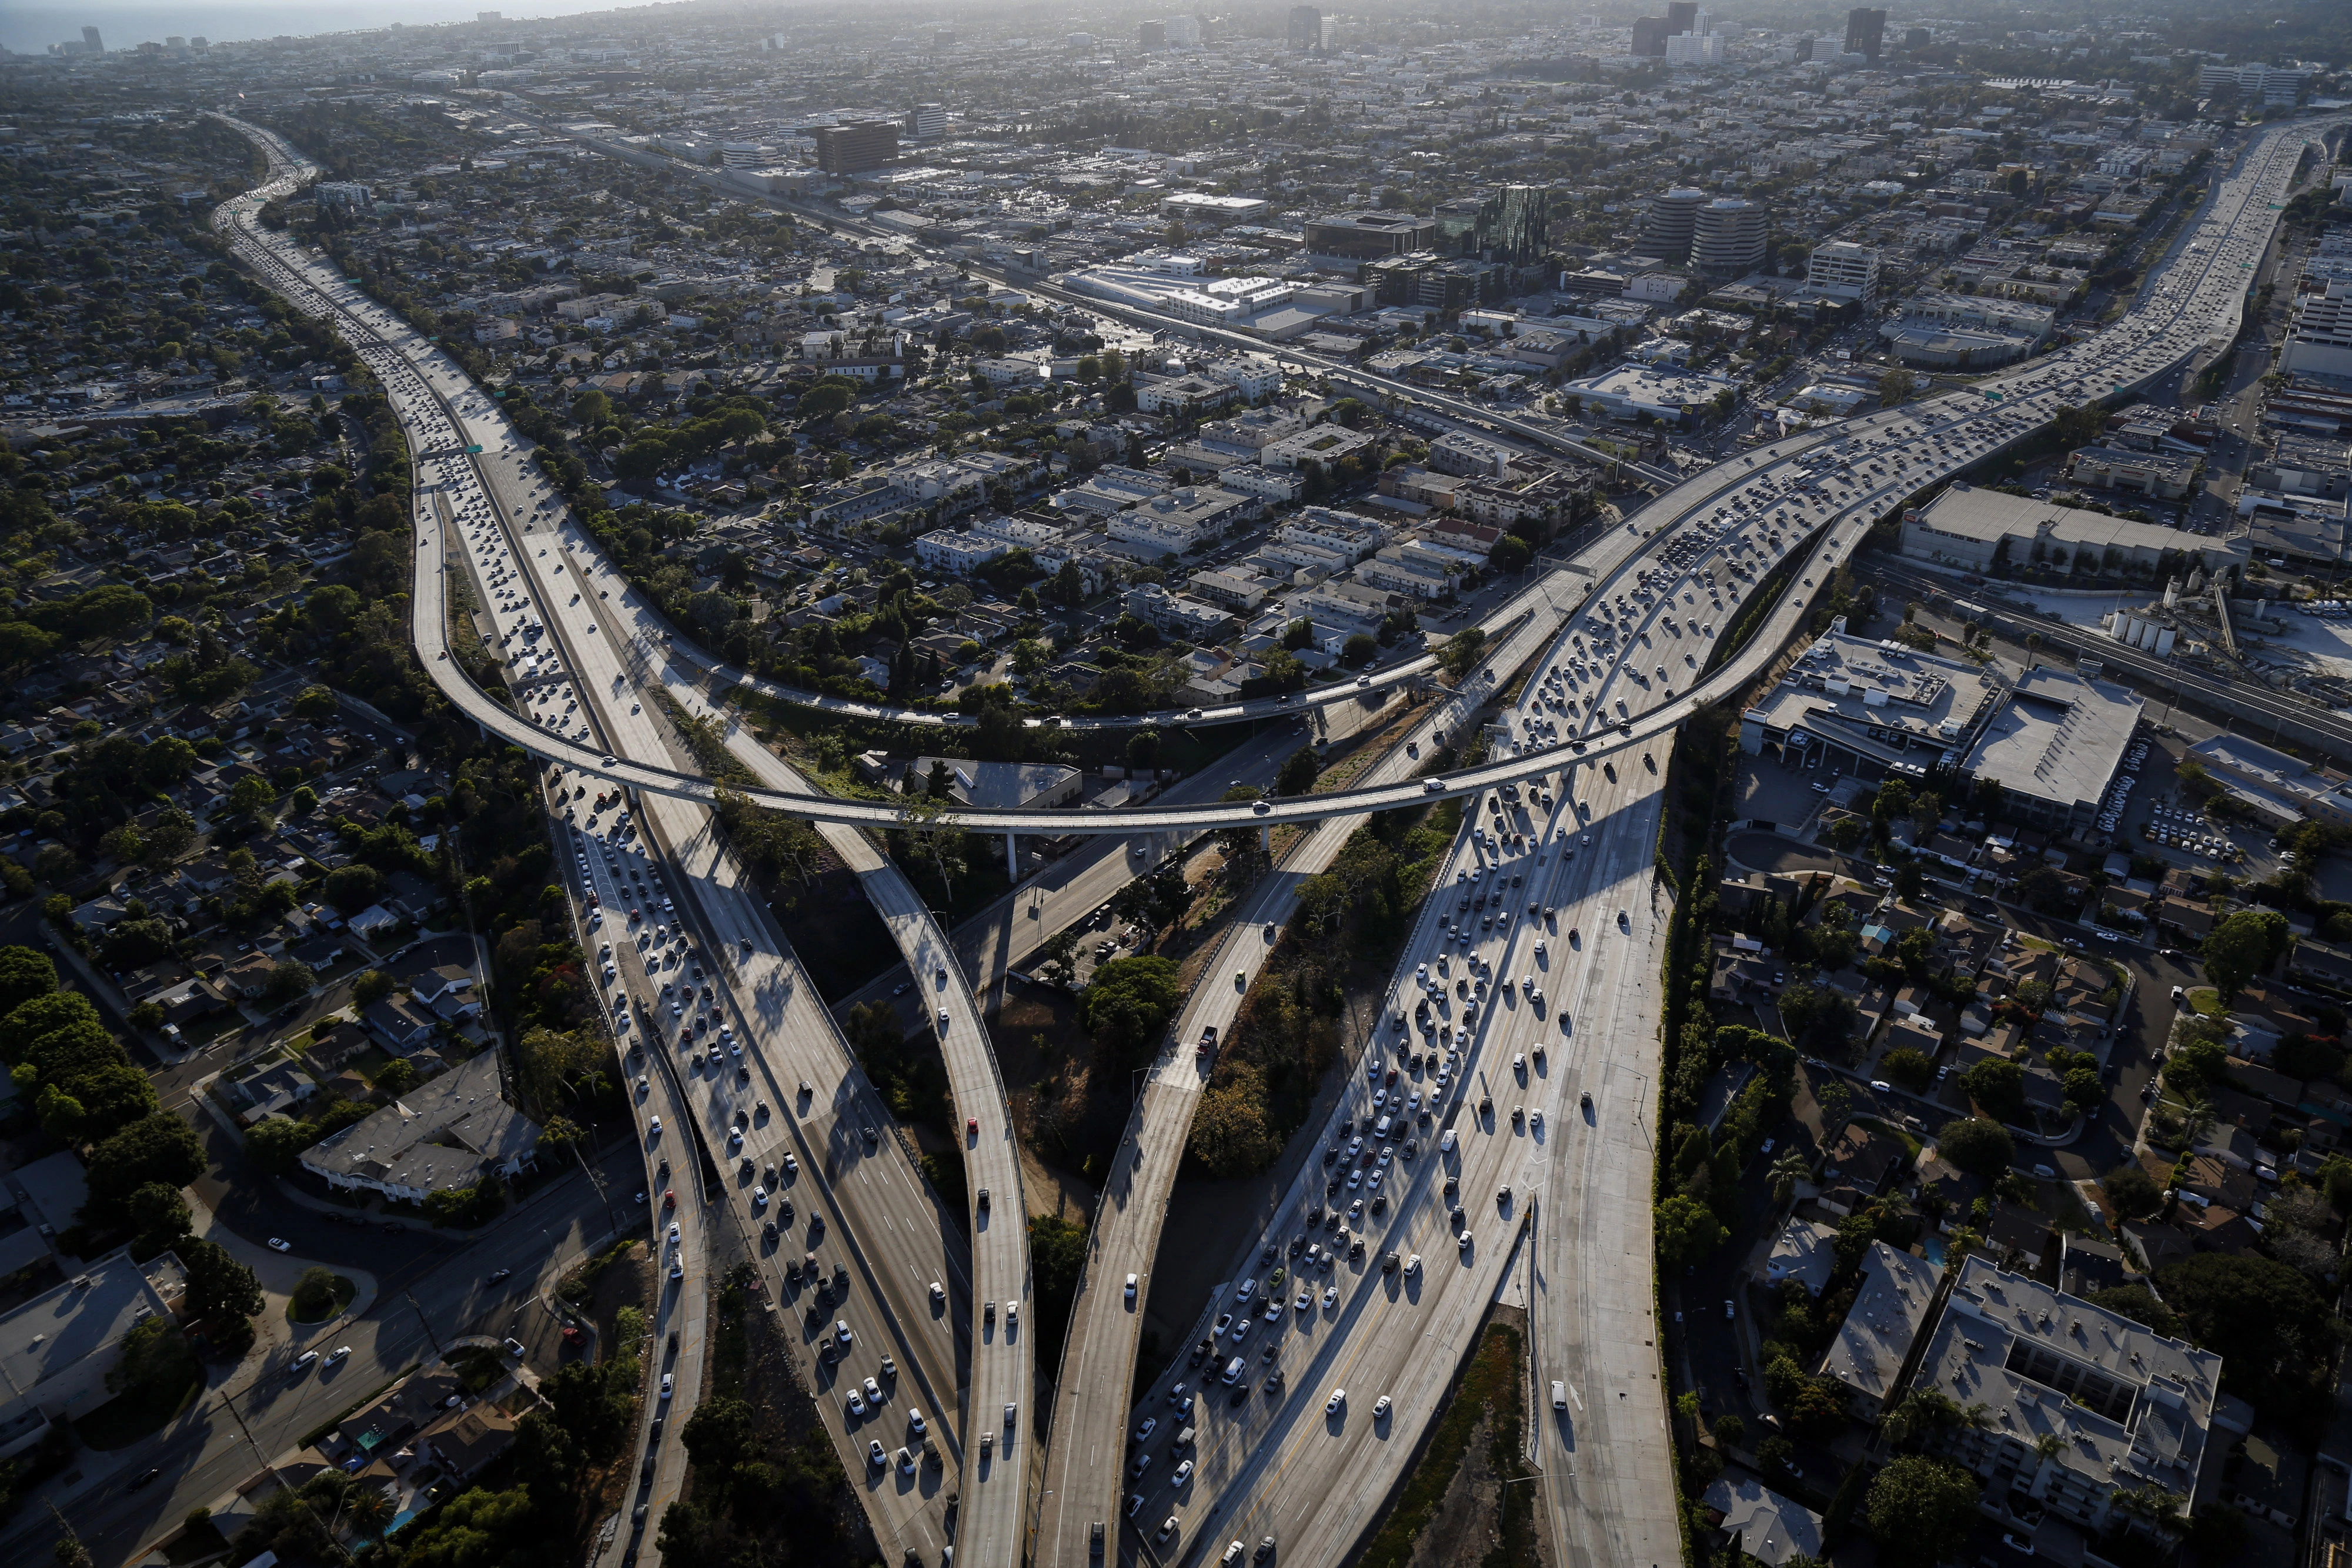 Vehicles sit in rush hour traffic between the Interstate 405 and 10 freeways in this aerial photograph taken over Los Angeles, California, U.S., on Friday, July 10, 2015. The greater Los Angeles region routinely tops the list for annual traffic statistics of metropolitan areas for such measures as total congestion delays and congestion delays per peak-period traveler. Photographer: Patrick T. Fallon/Bloomberg via Getty Images